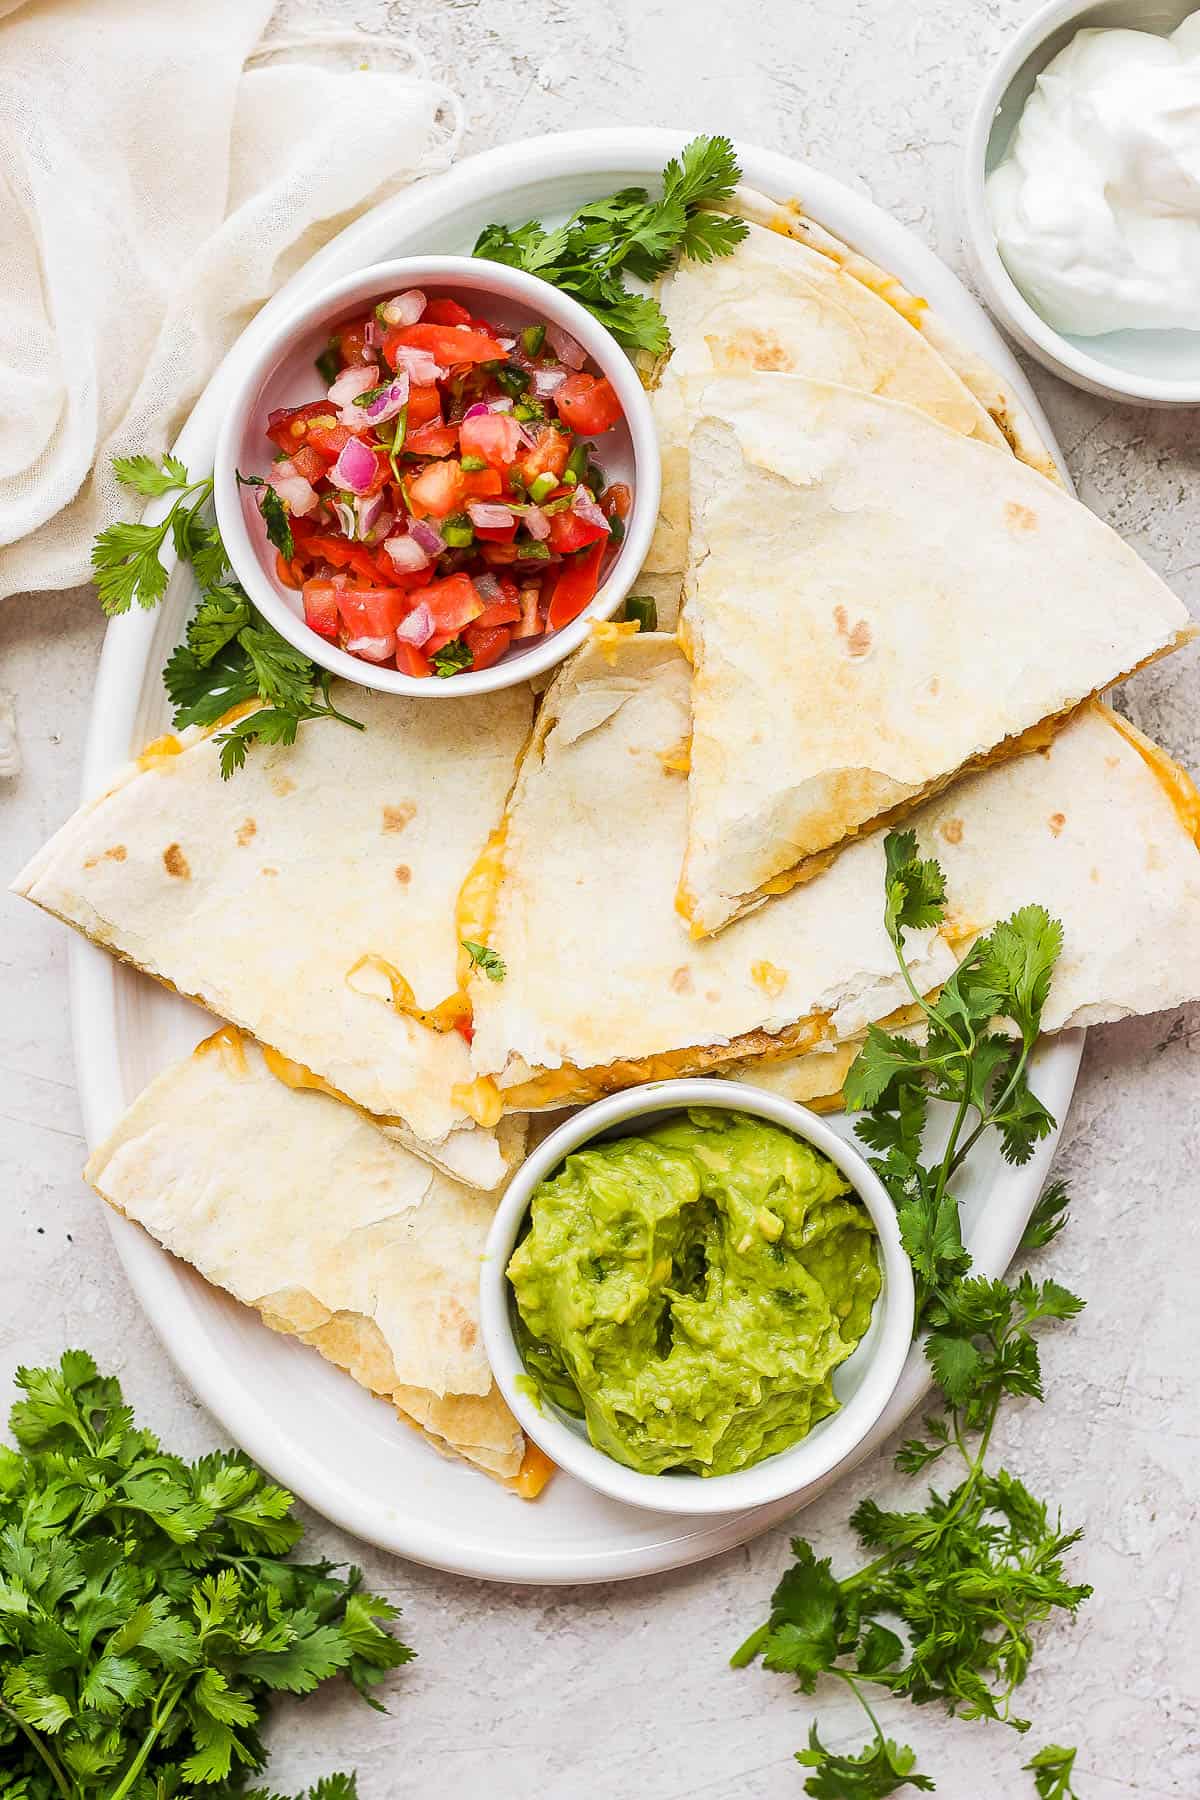 A plate of chicken quesadillas served with a side of pico de gallo and guacamole.